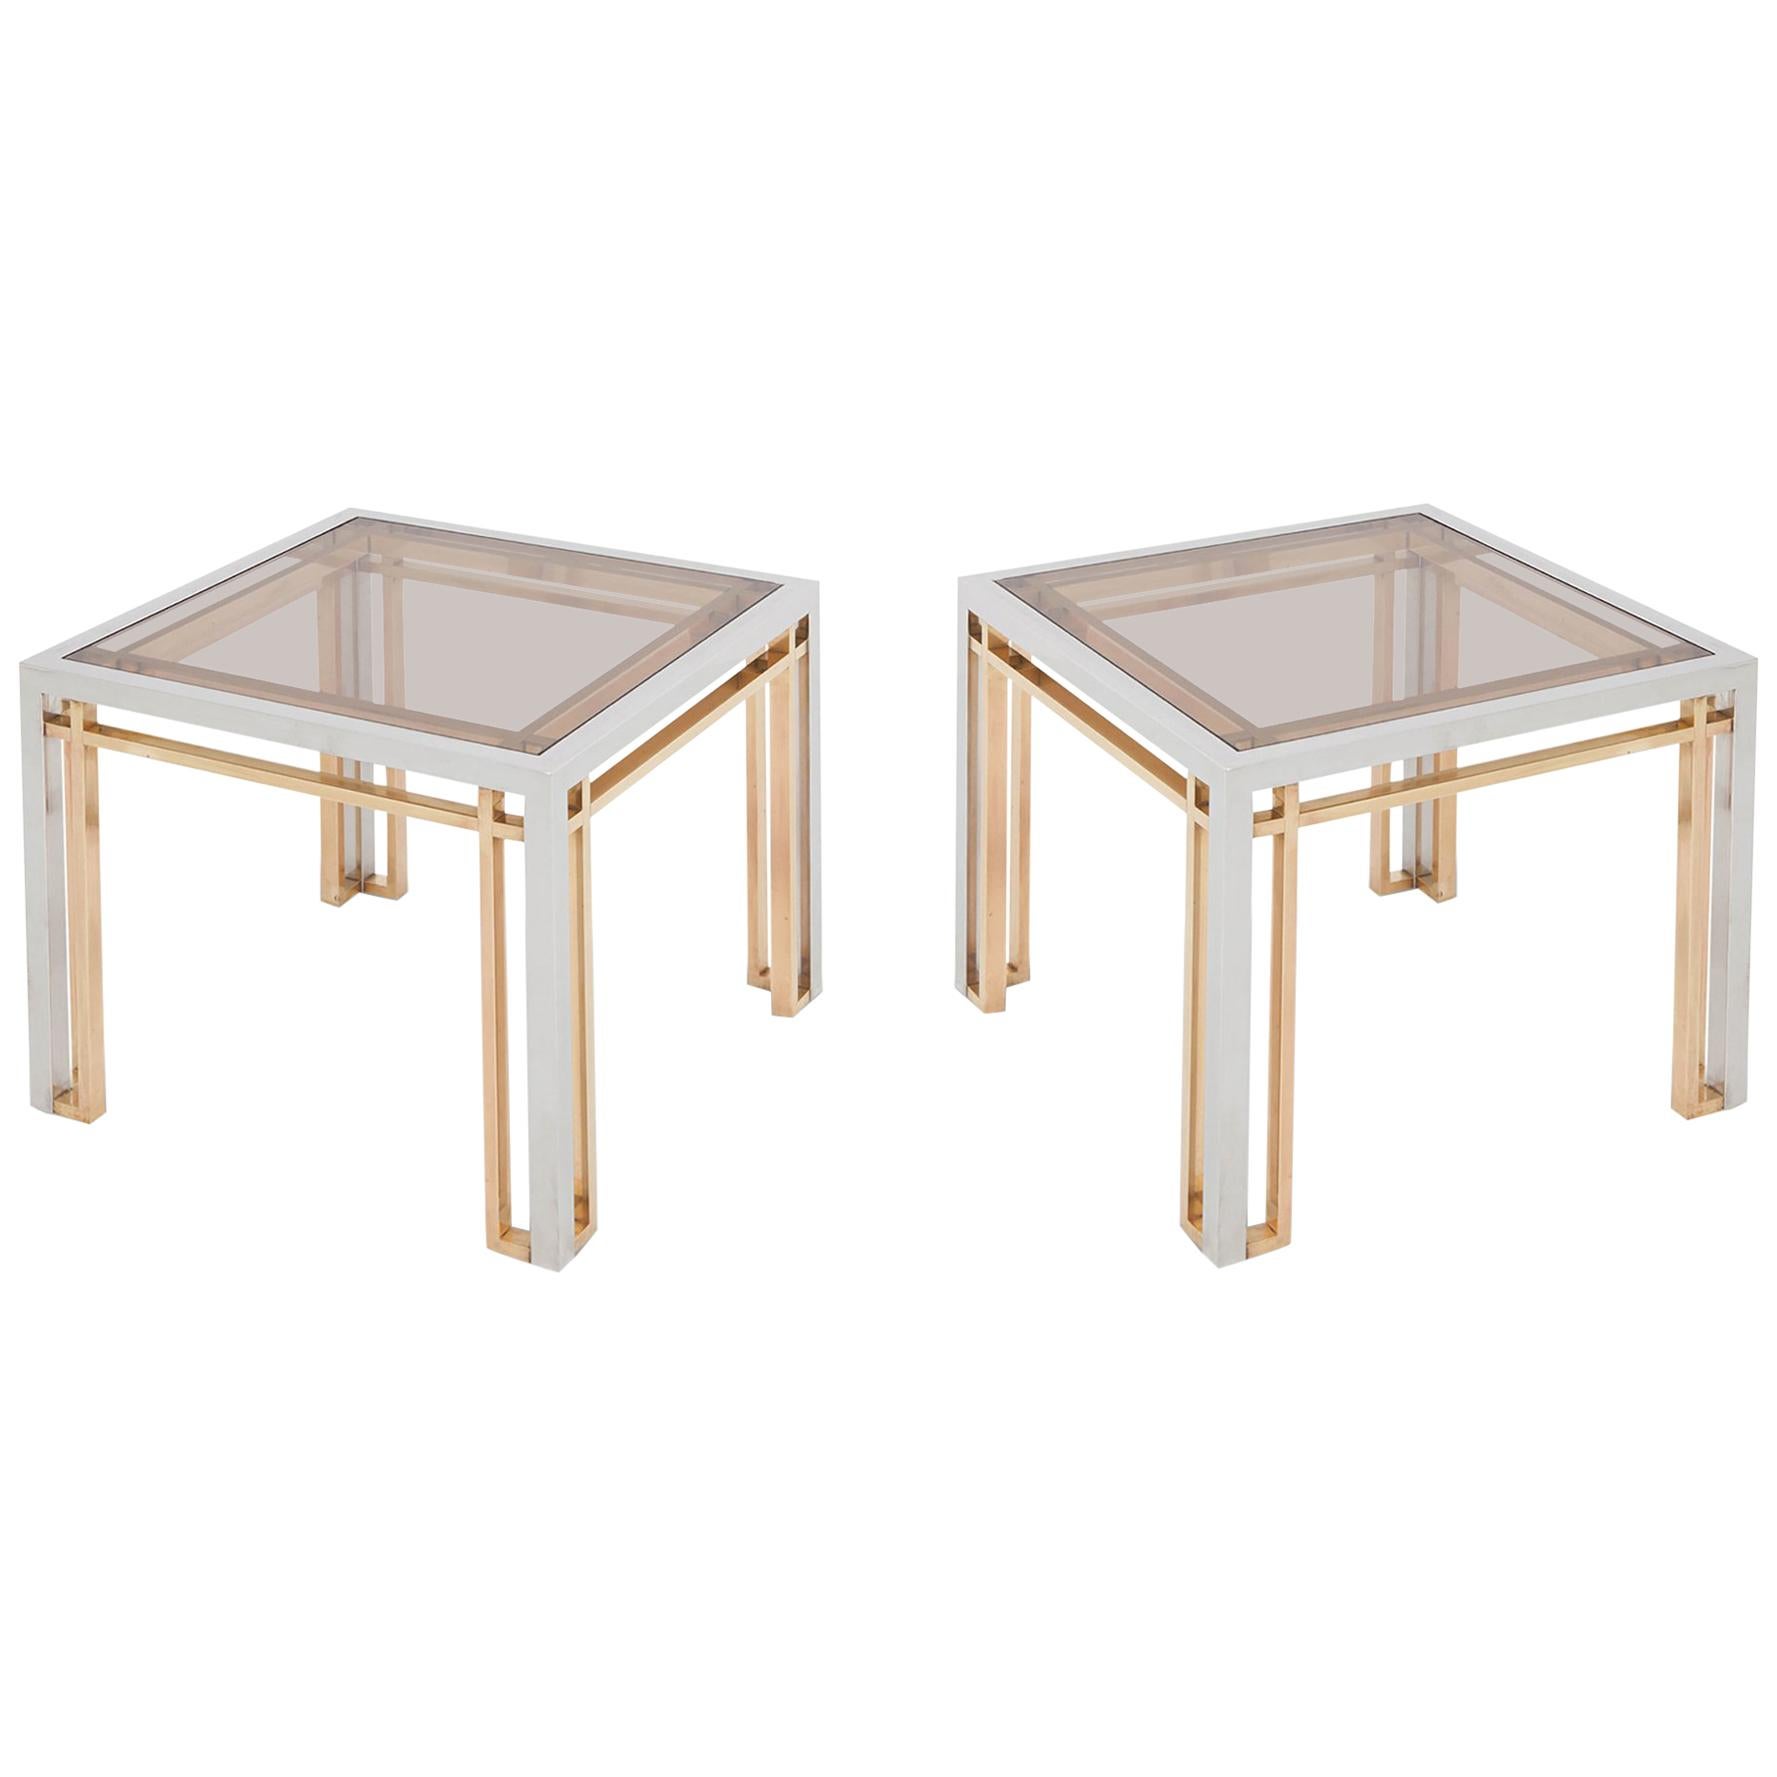 Chrome, brass and smoked glass side tables, Romeo Rega, Italy, 1970s.

A well-known design by the master. A chrome-plated frame, finished with brass details, resulting in a stunning, rich contrast and beautiful lining. Both tops are fitted with